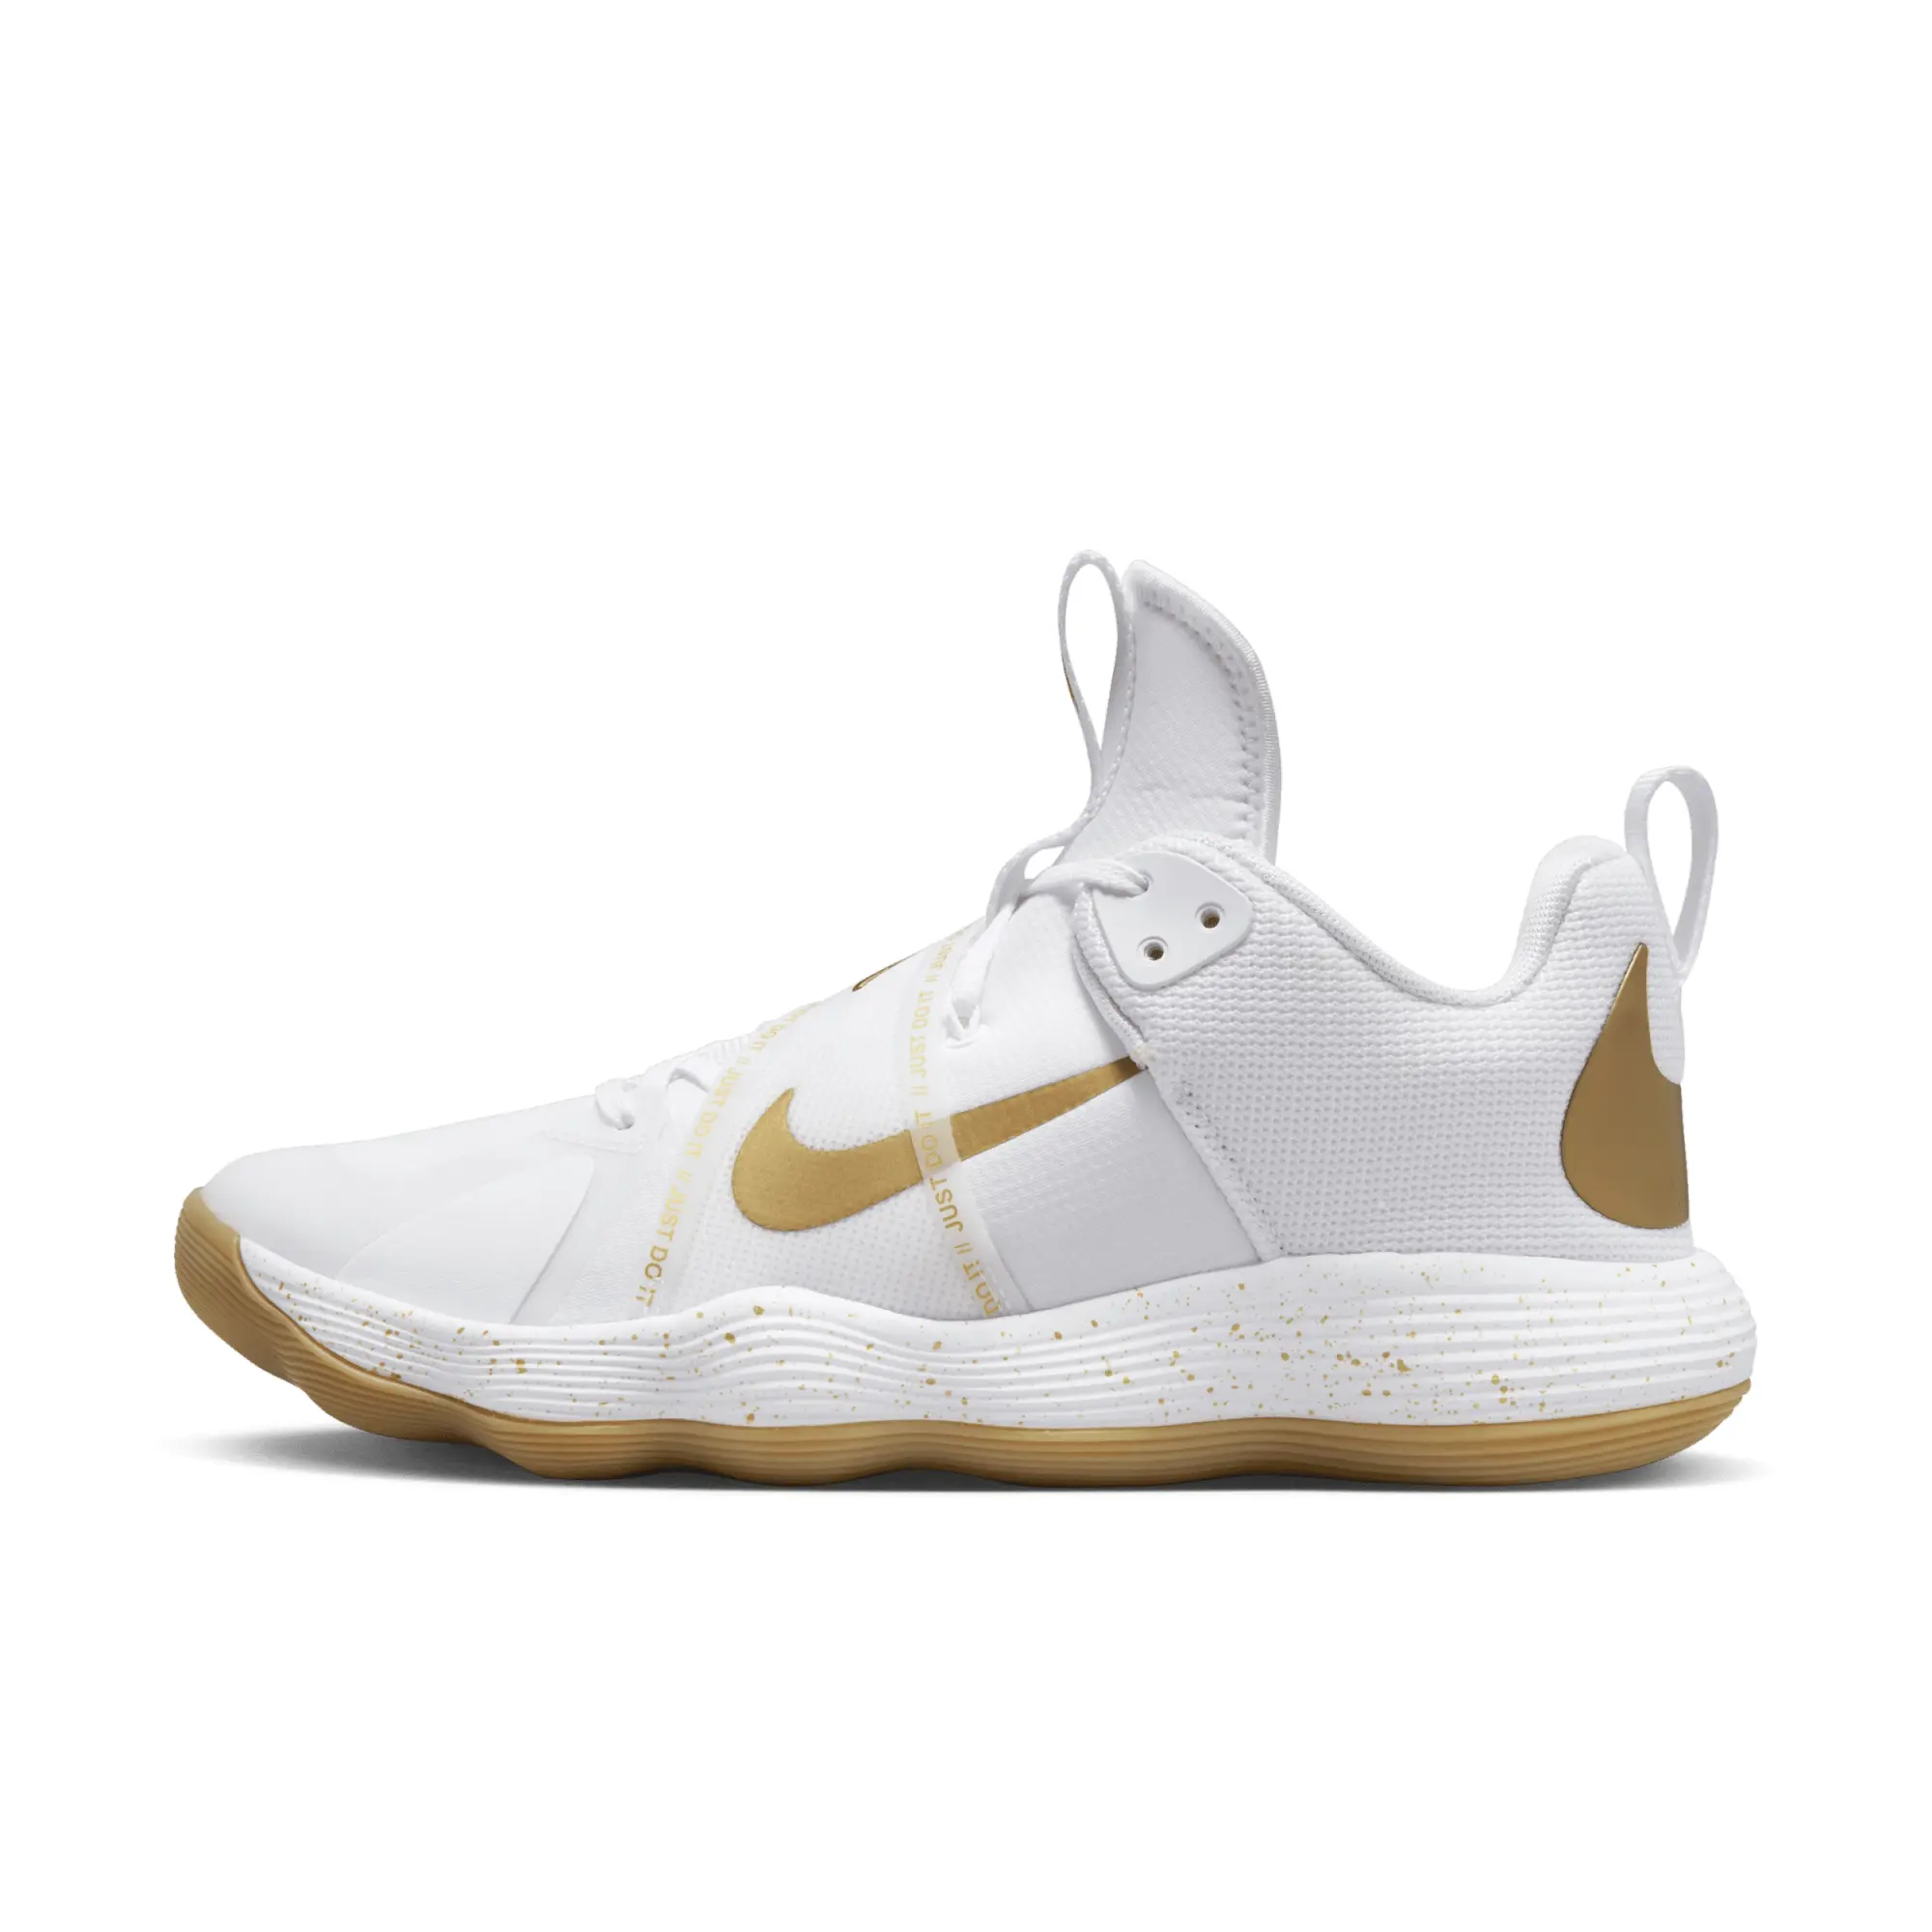 Nike React HyperSet LE Indoor Court Shoes - White